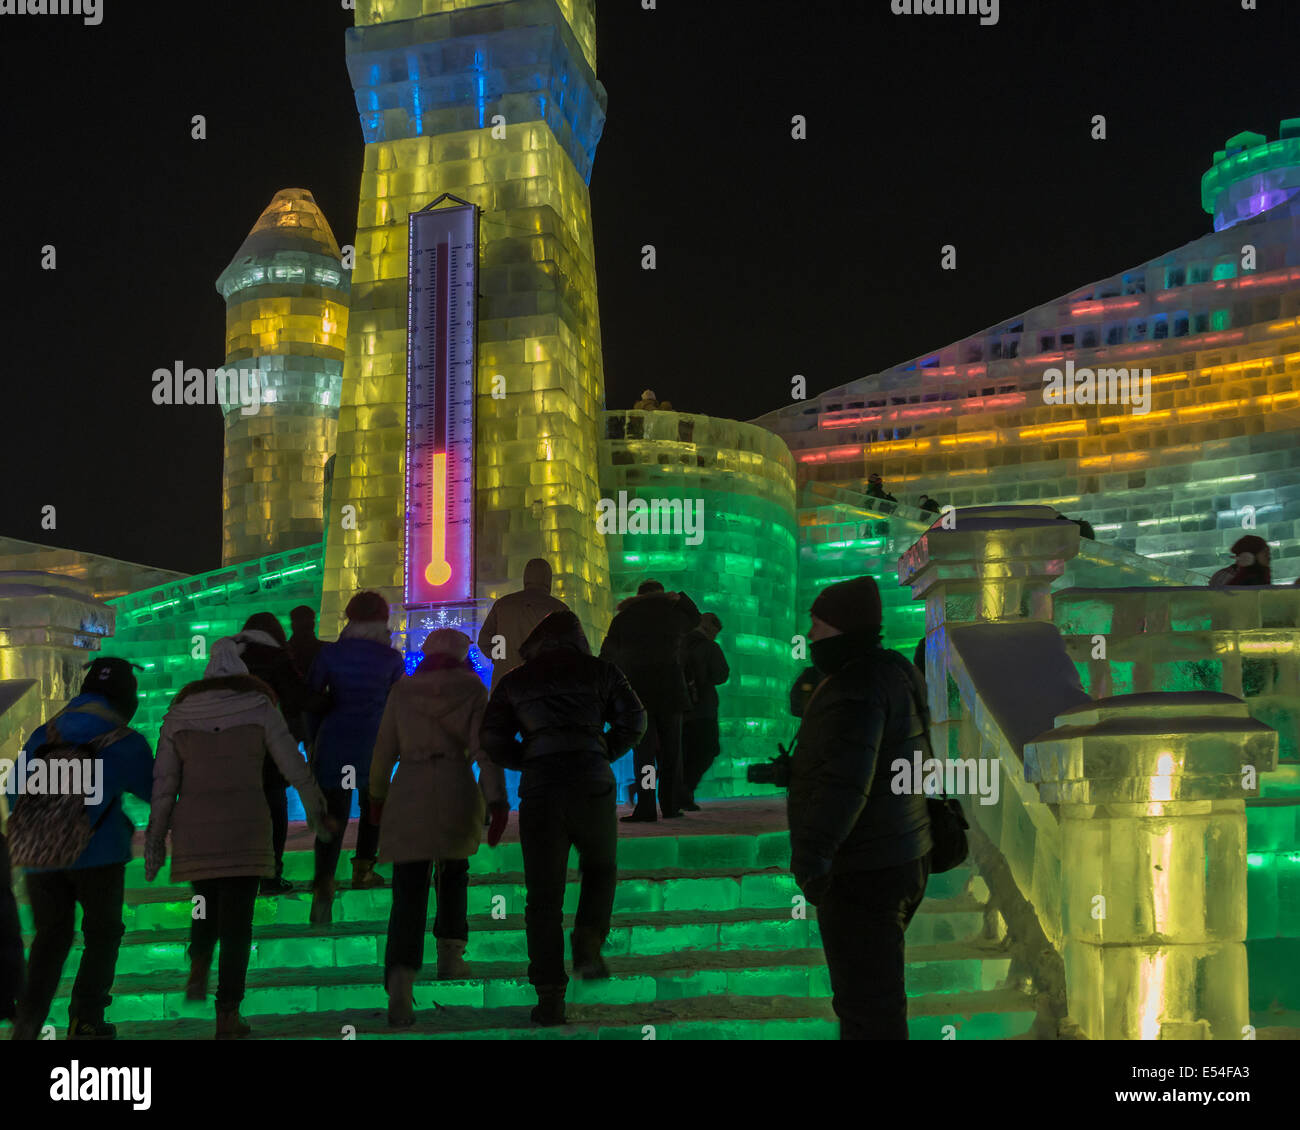 Thermometer showing -33oC at the International Ice Festival, Harbin, China, Stock Photo